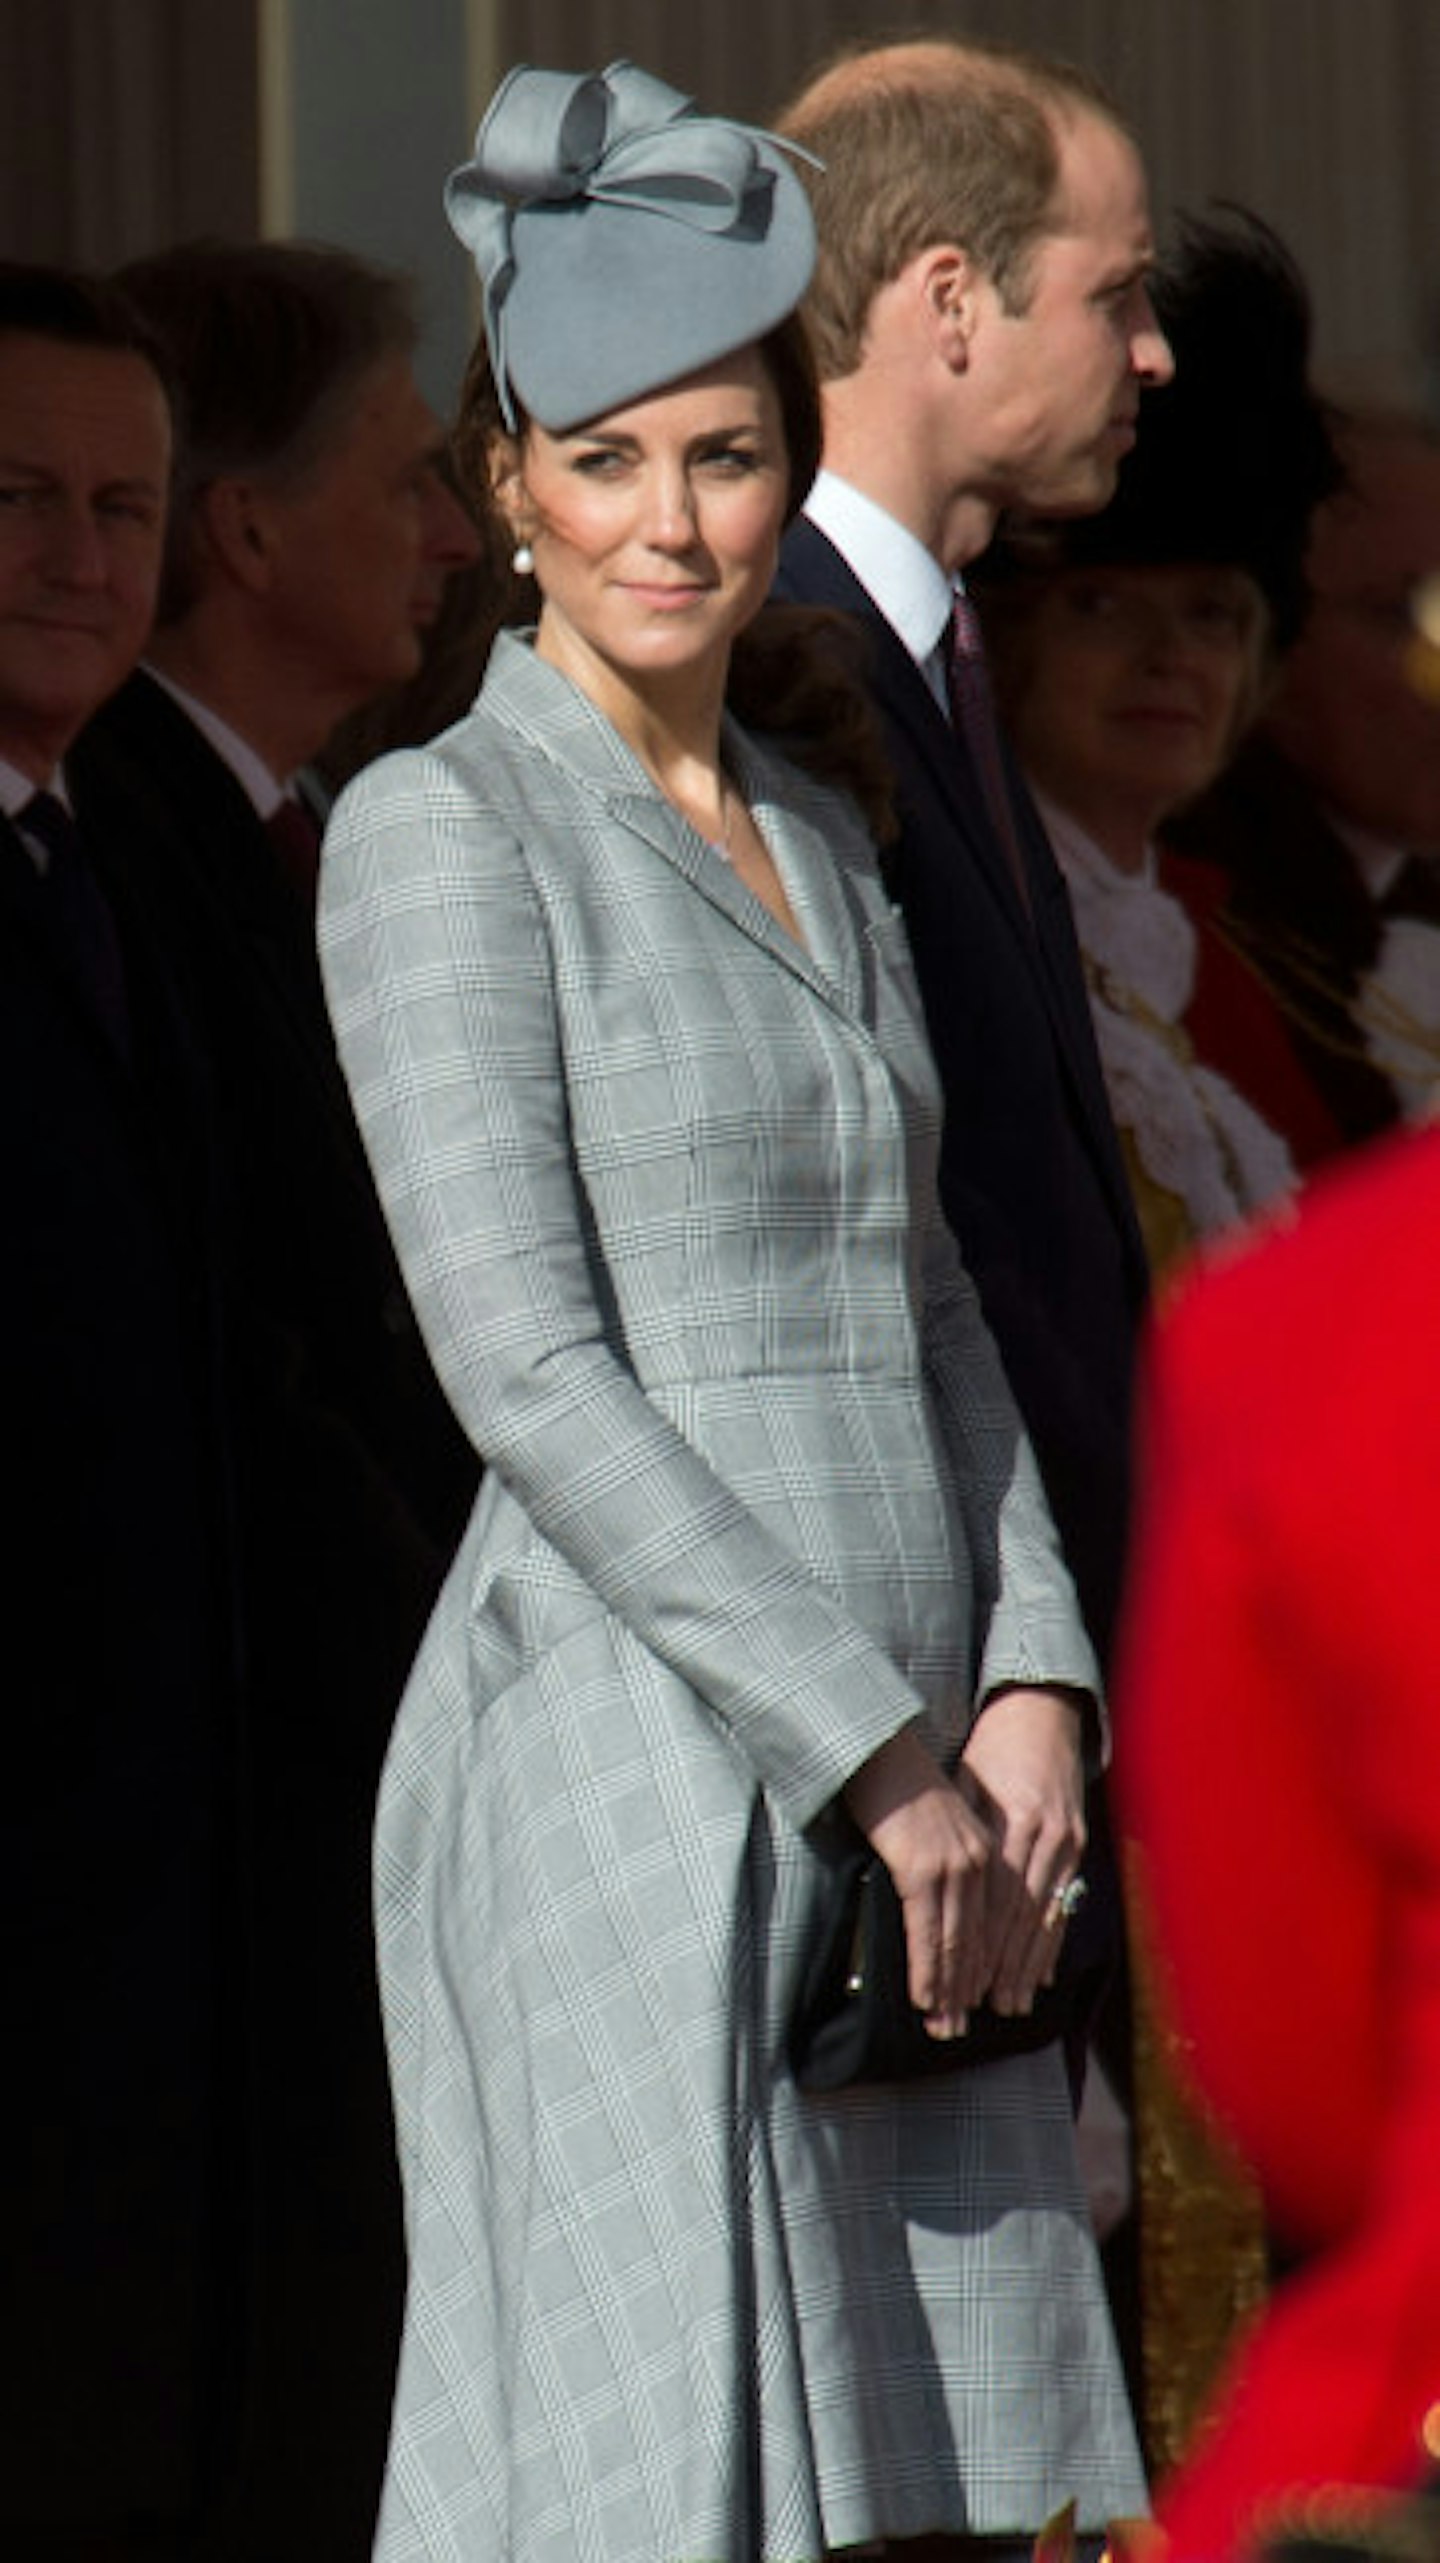 Kate's baby bump was visible during her recent engagement